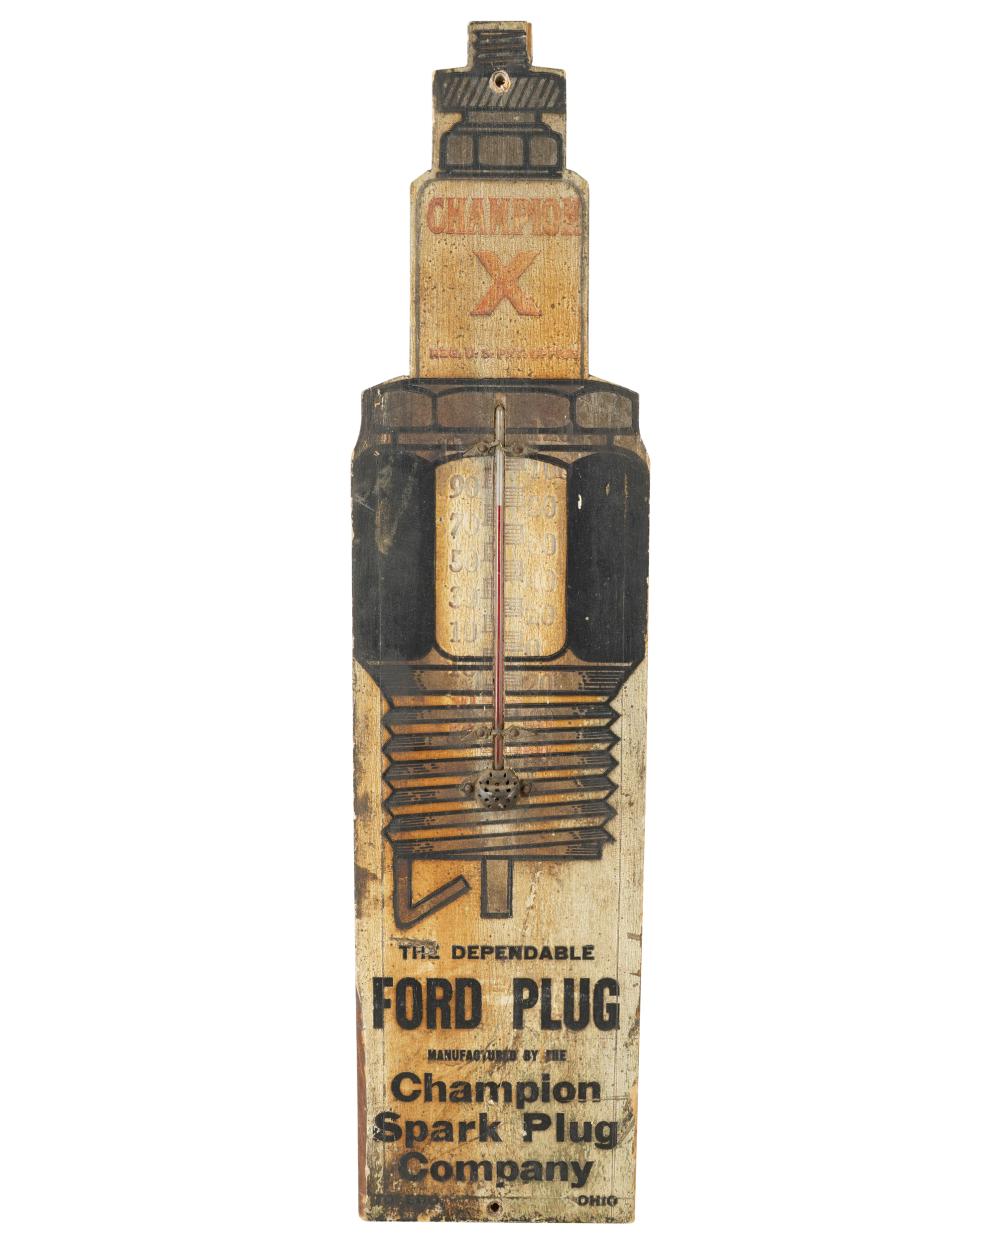 FORD PLUG ADVERTISING SIGNpainted 3341f6